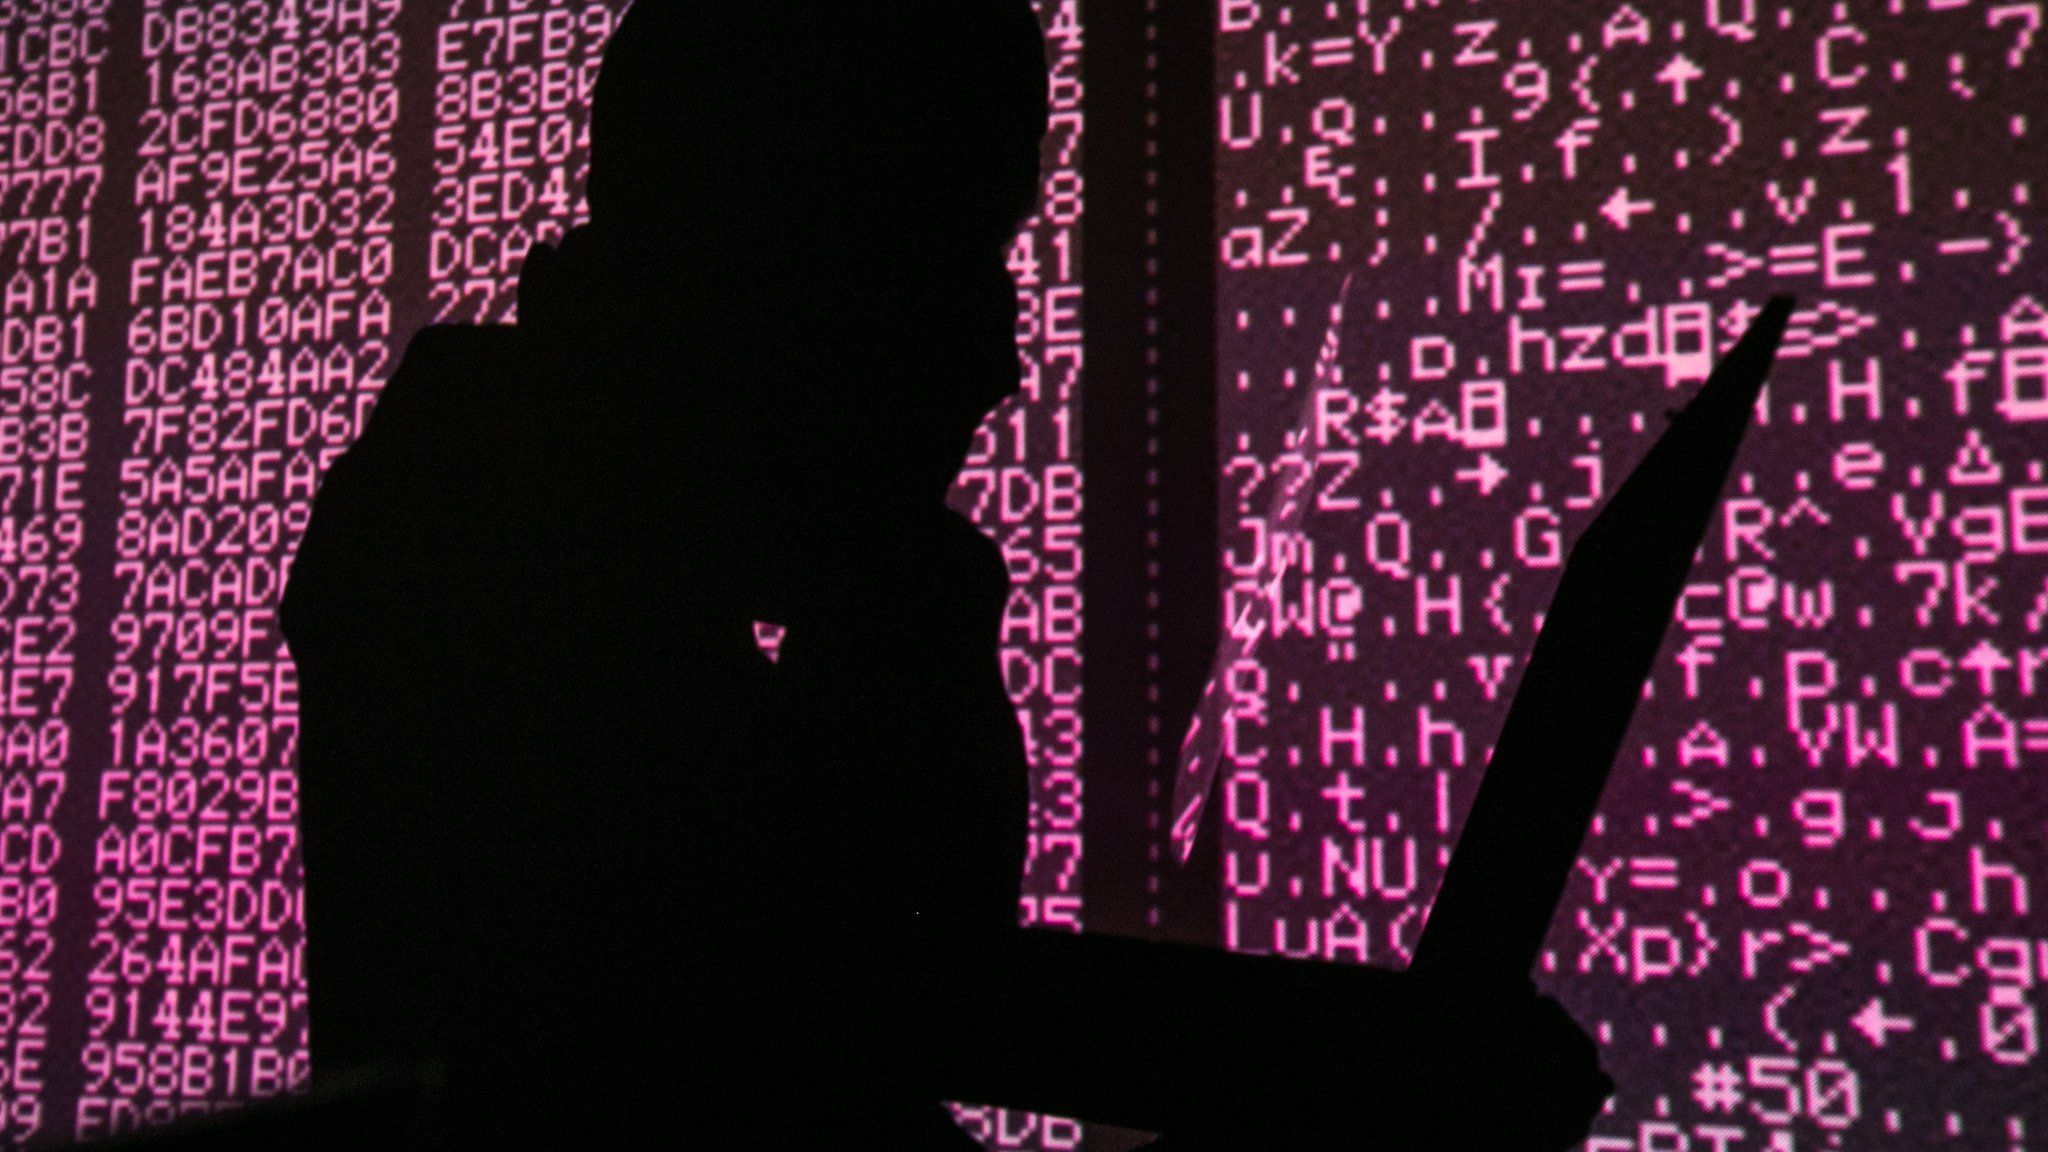 Silhouette of person on a computer